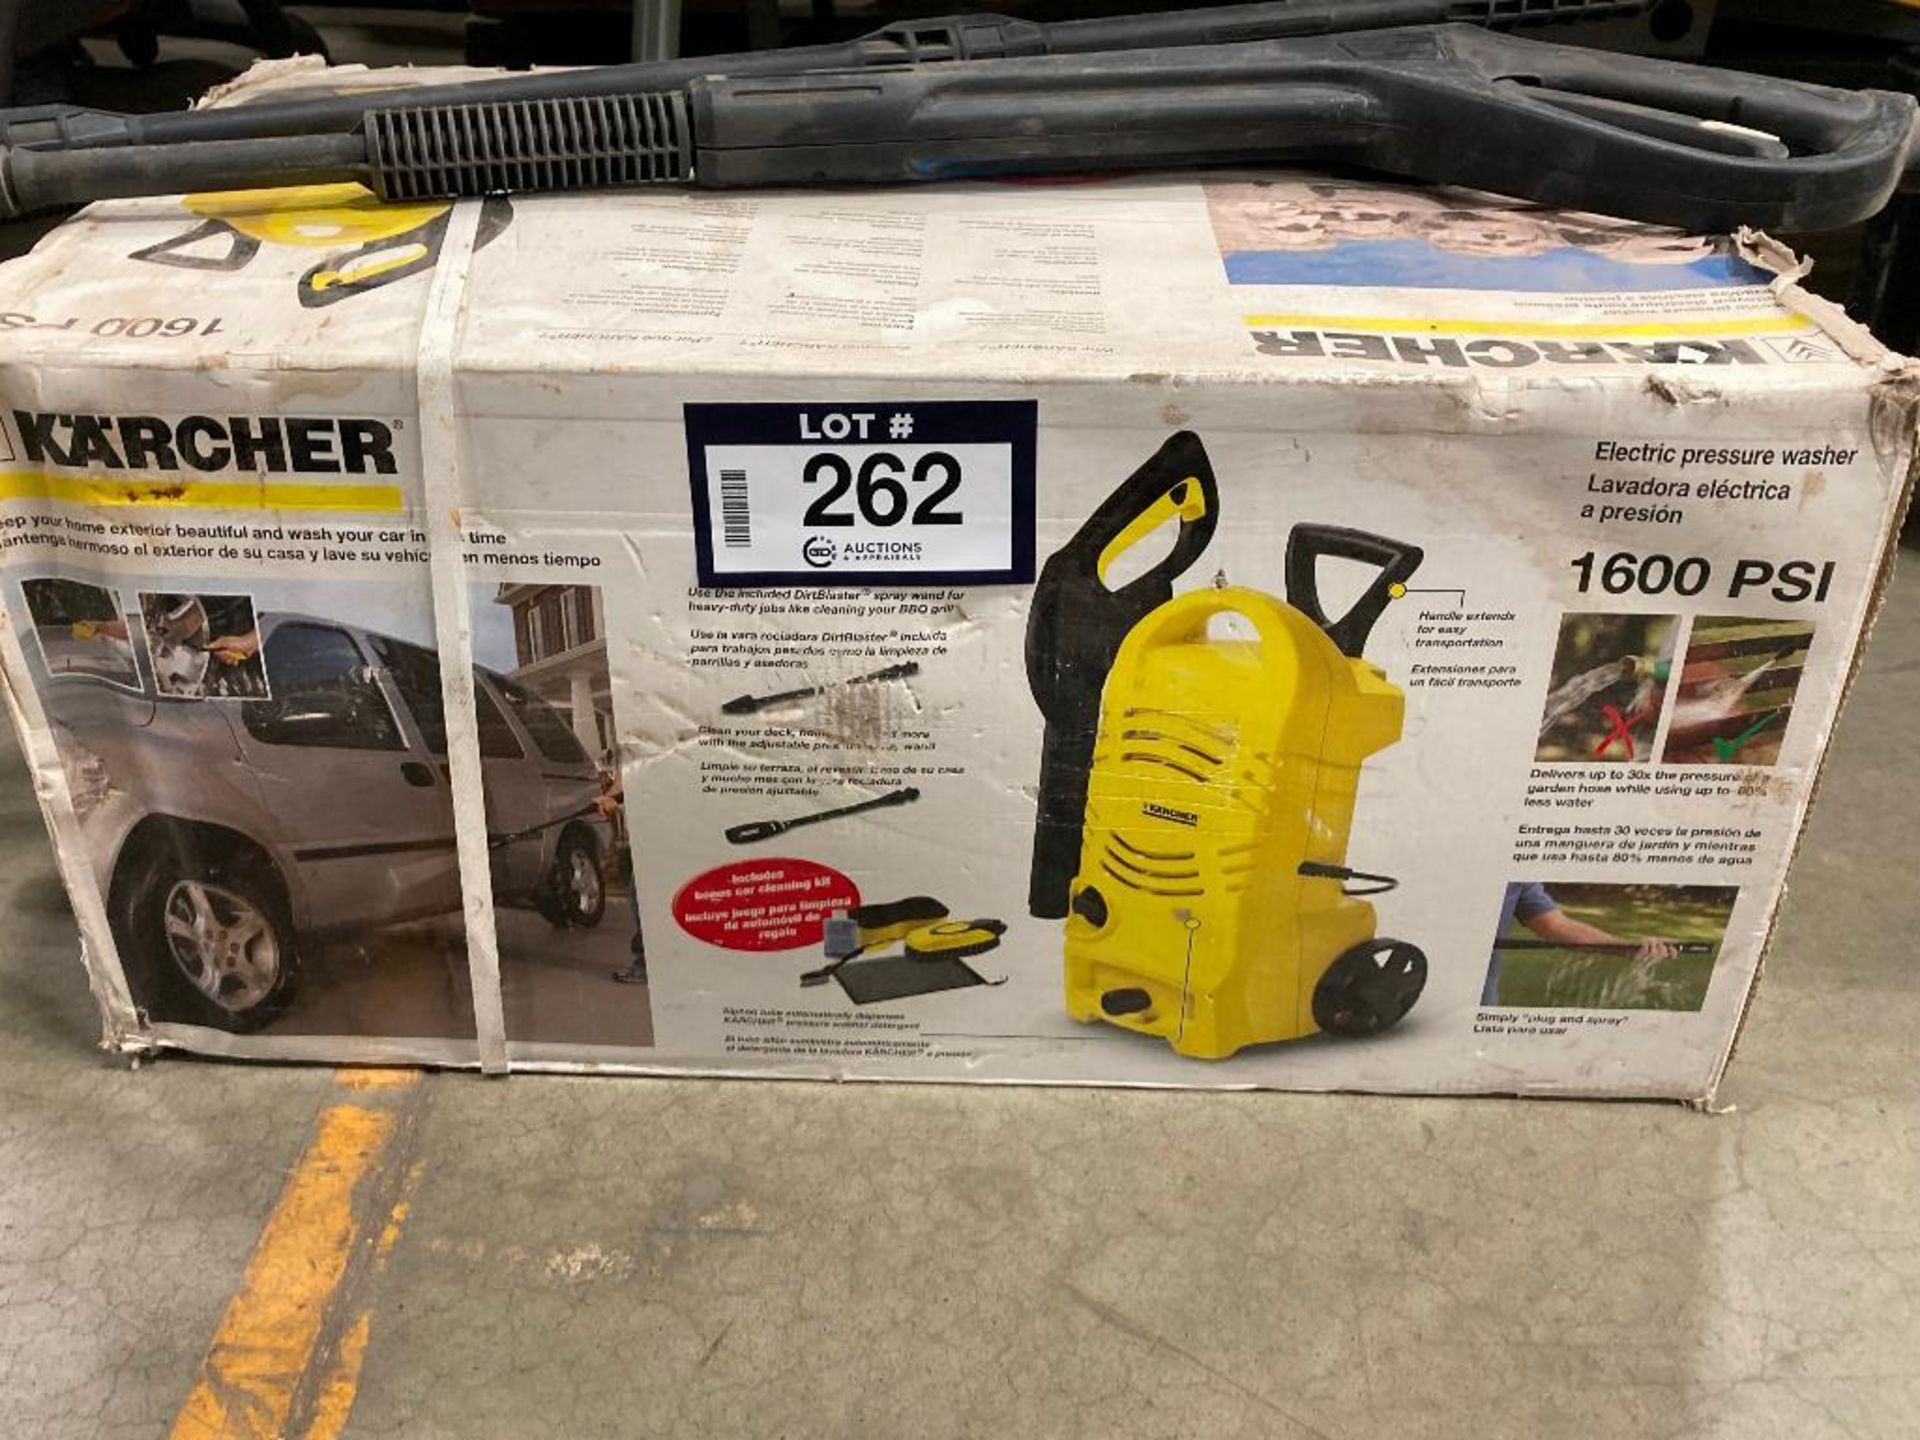 Karcher 1600 PSI Electric Pressure Washer - Image 4 of 5